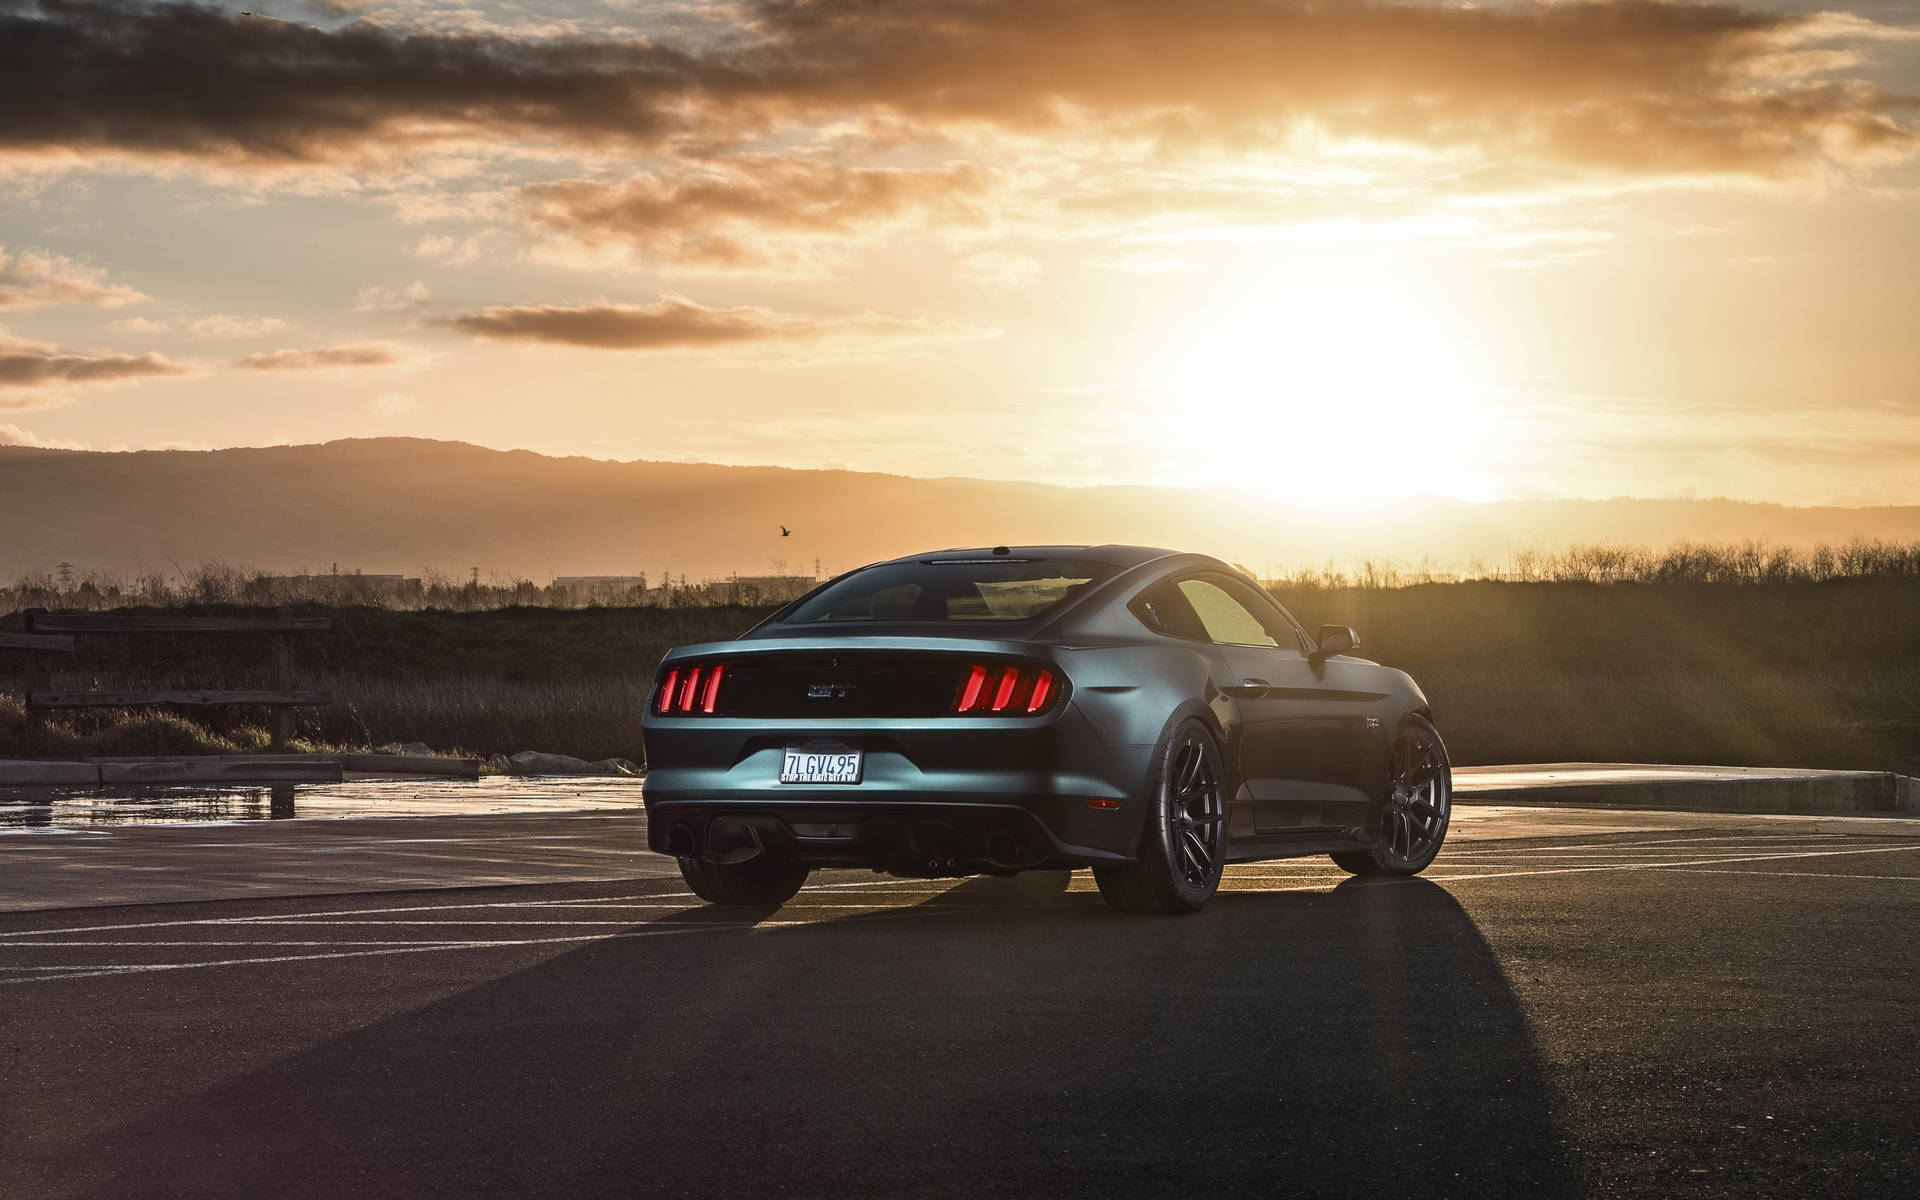 Ford Mustang In Sunset